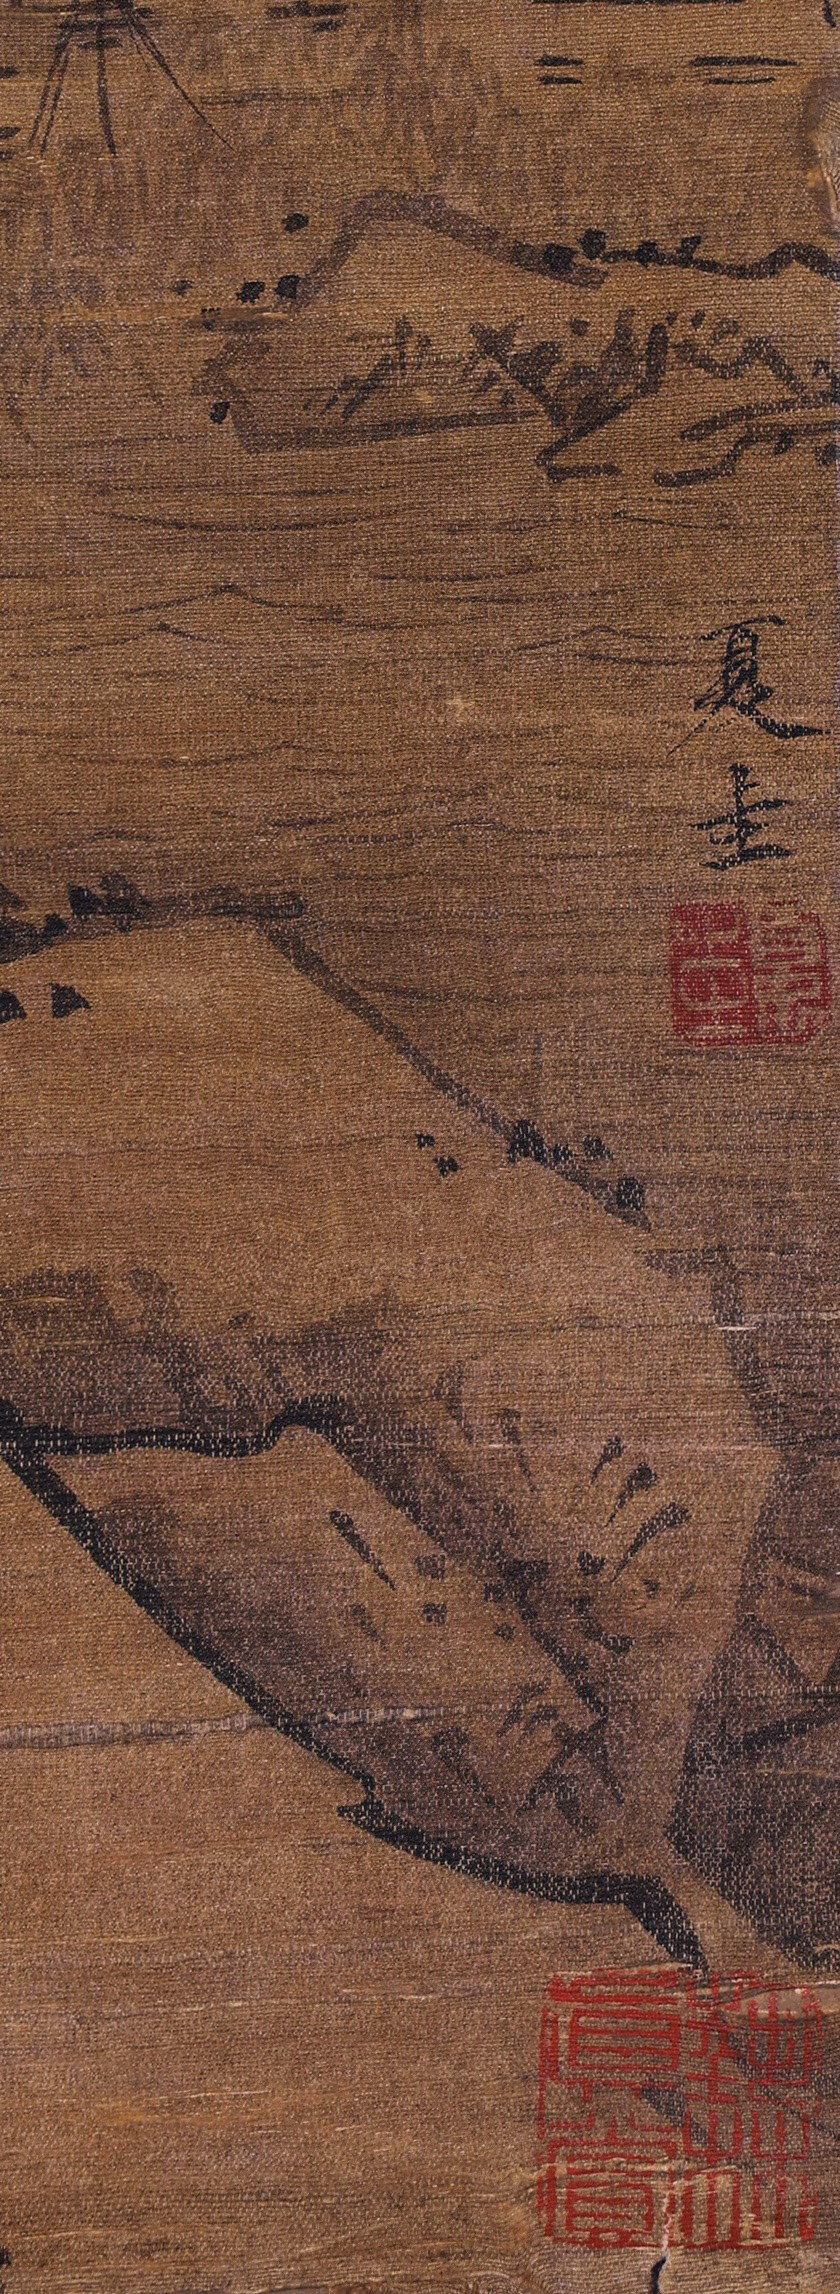 A Chinese Scroll Painting Signed Xia Gui - Image 7 of 9